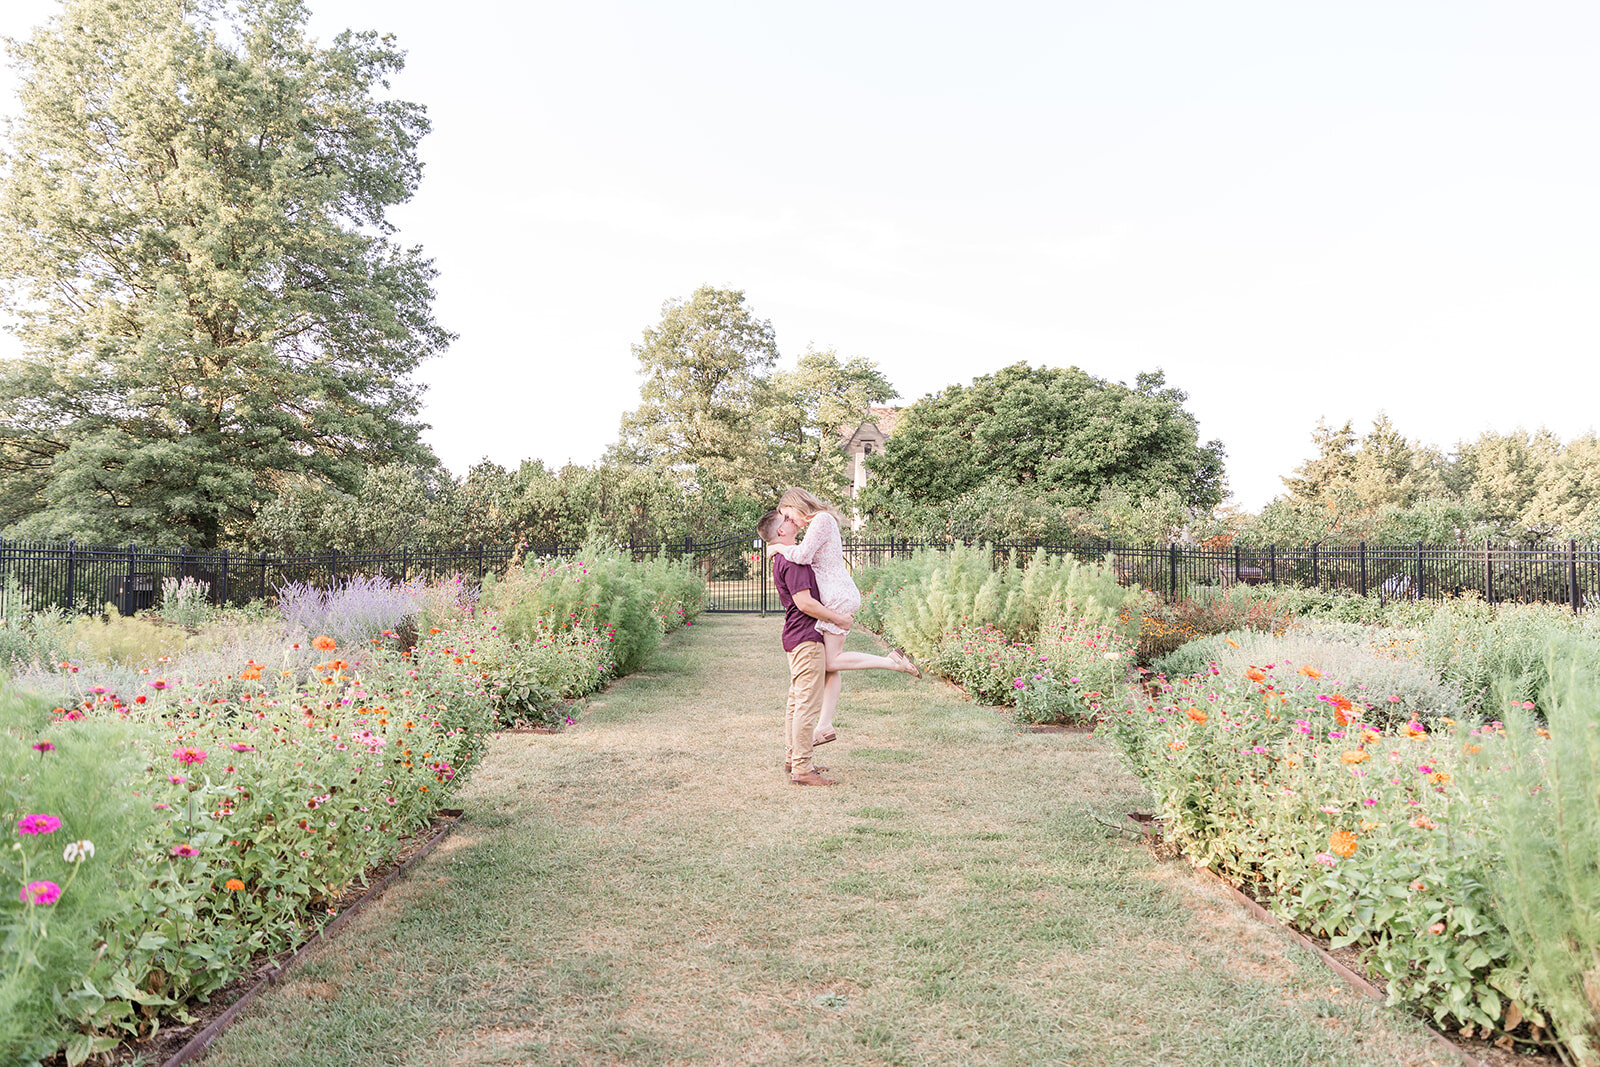 Before saying “I do”  at Pinehall at Esiler Farms, Diana Gramlich photography captured the best of Pittsburgh with Haley and Josh at their summertime engagement session at Hartwood Acres and North Shore.